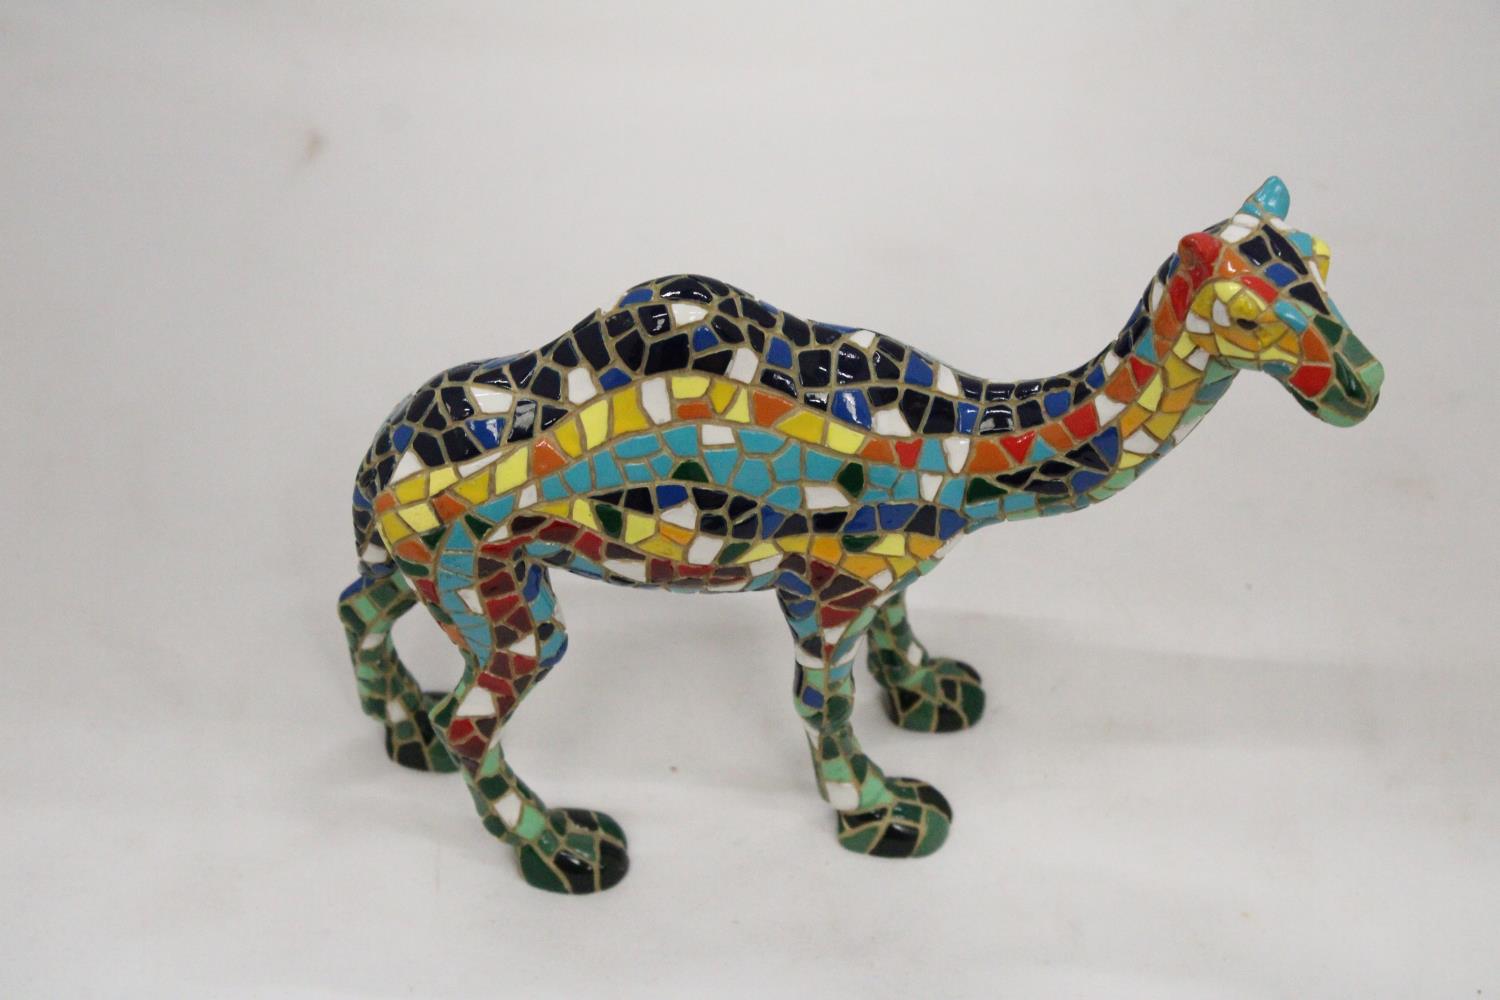 A HANDMADE SPANISH STONE CAMEL MOSAIC BY BARCINOS APPROXIMATELY 18CM HIGH - Image 5 of 5